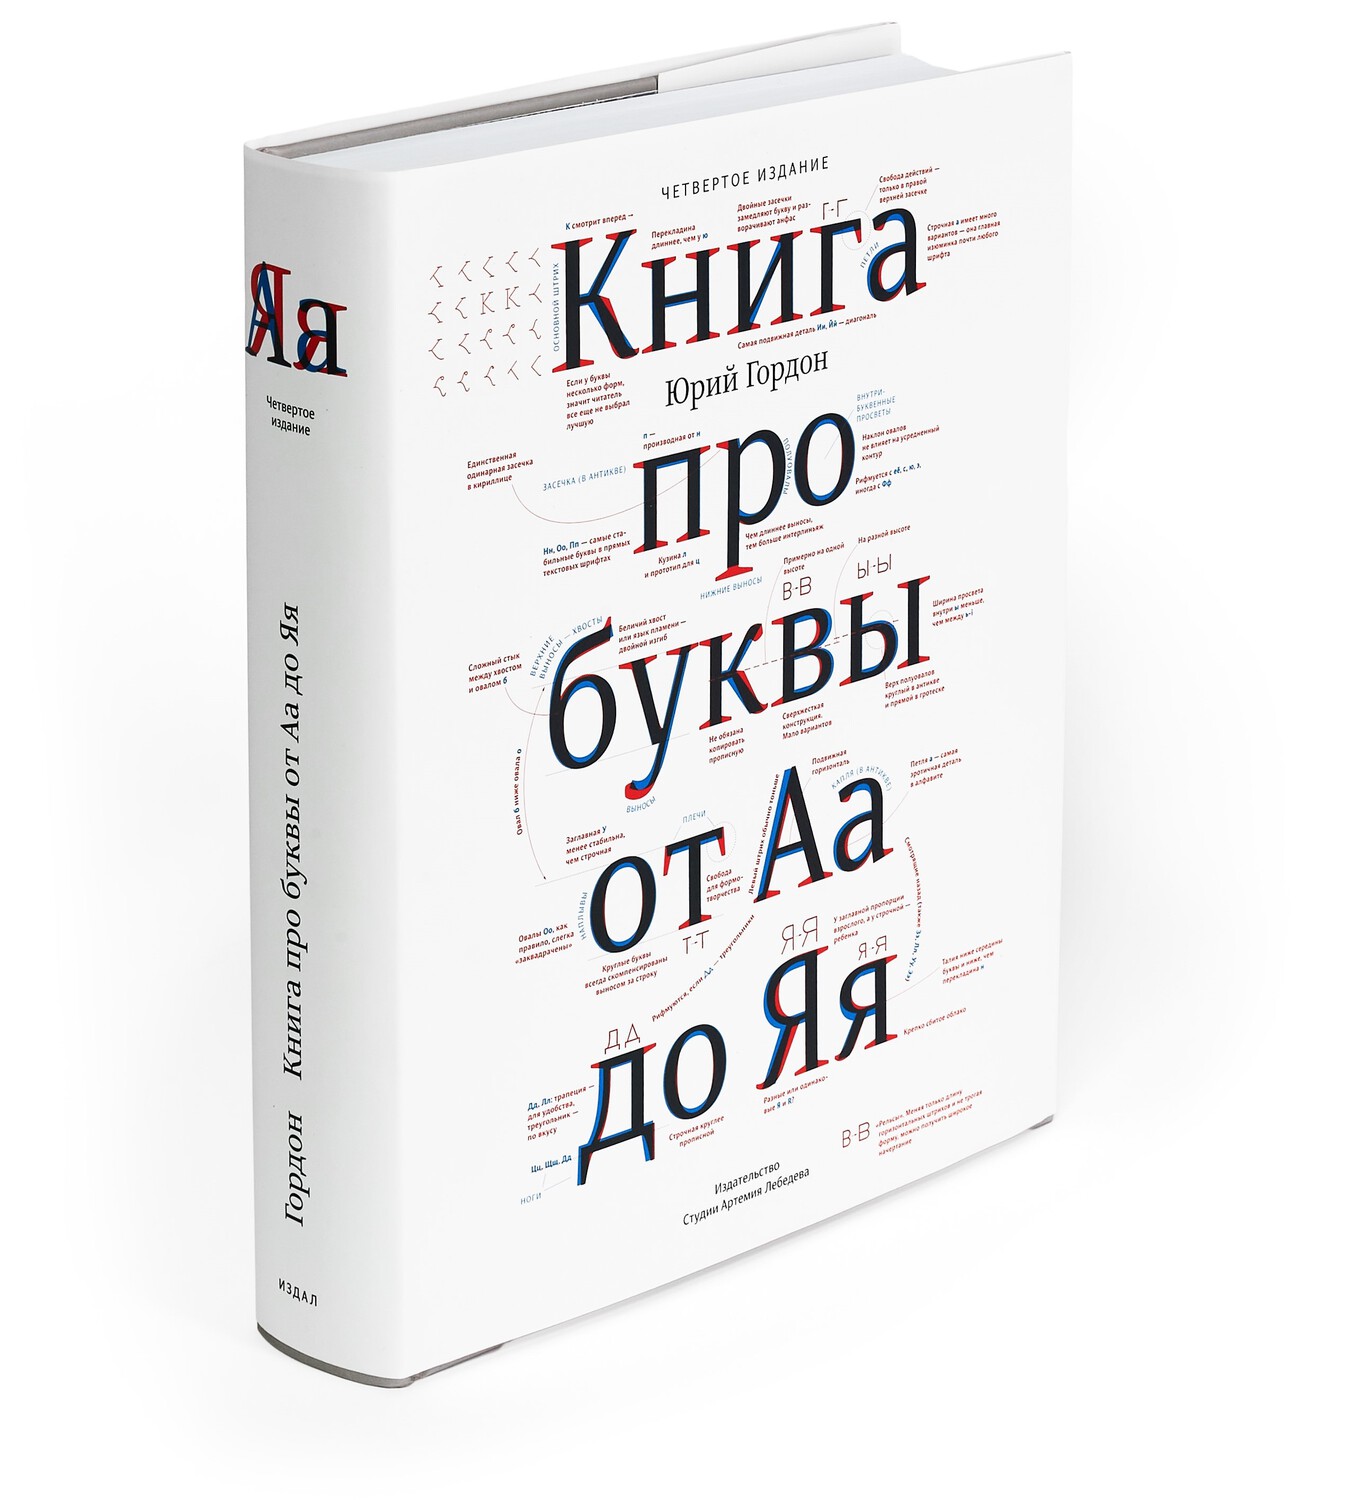 Book of Letters from Аа to Яя, Fourth Edition (in Russian)